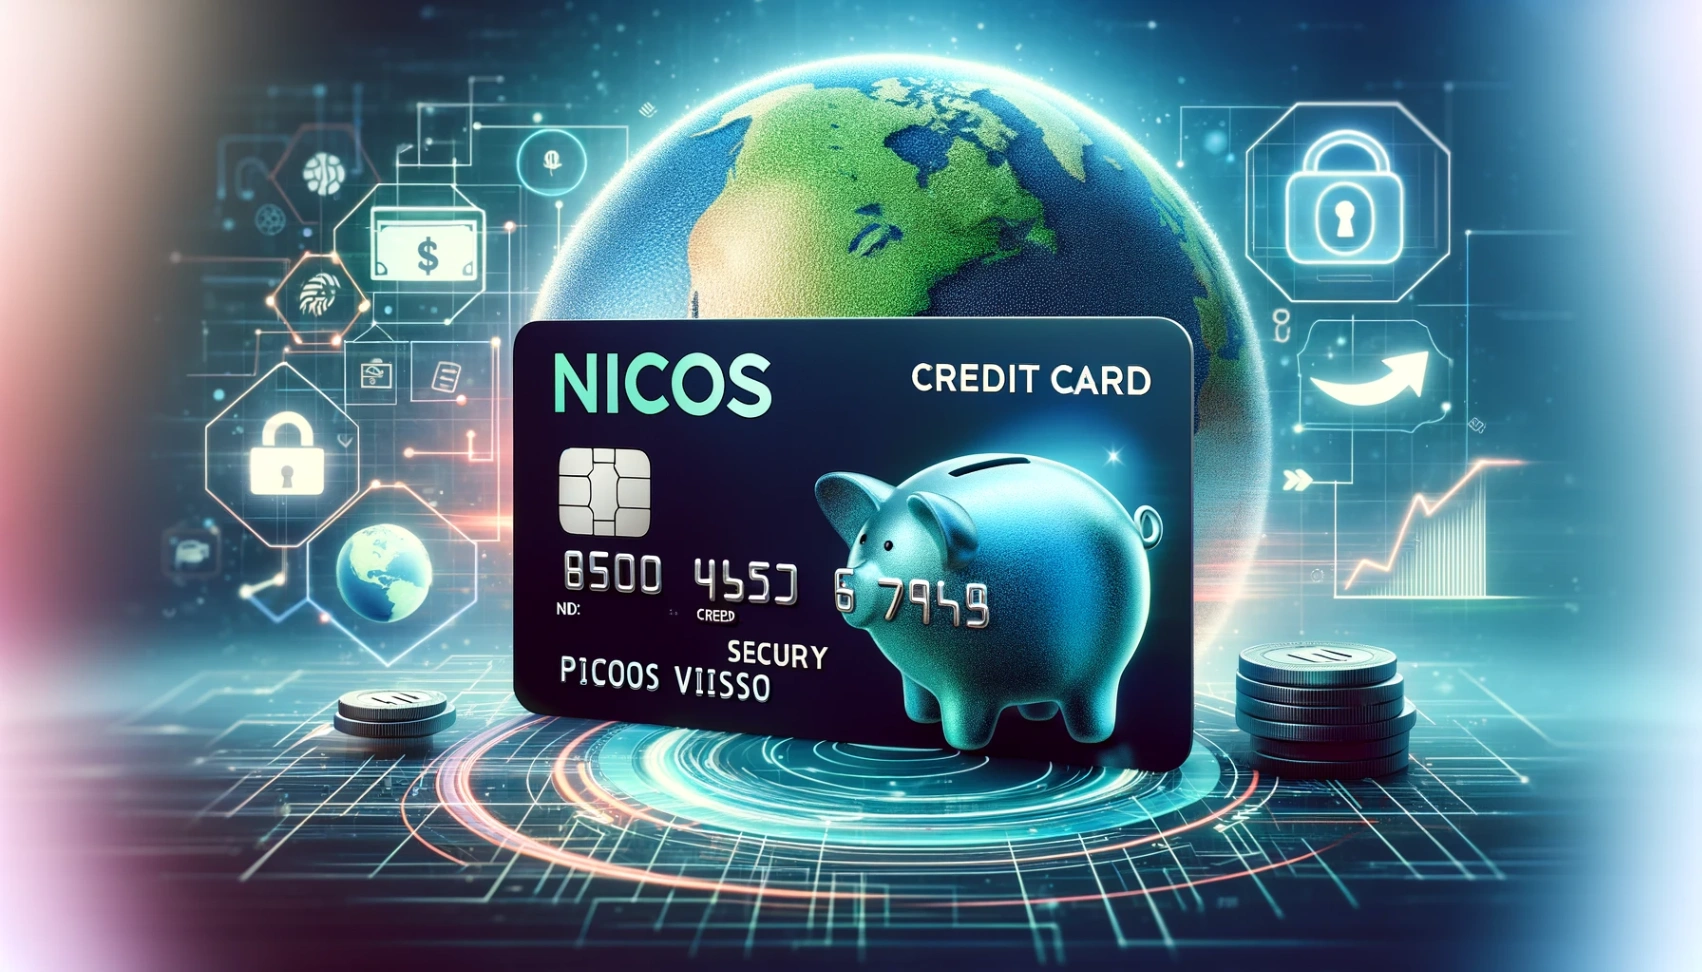 Learn How to Order Nicos Viaso Credit Card